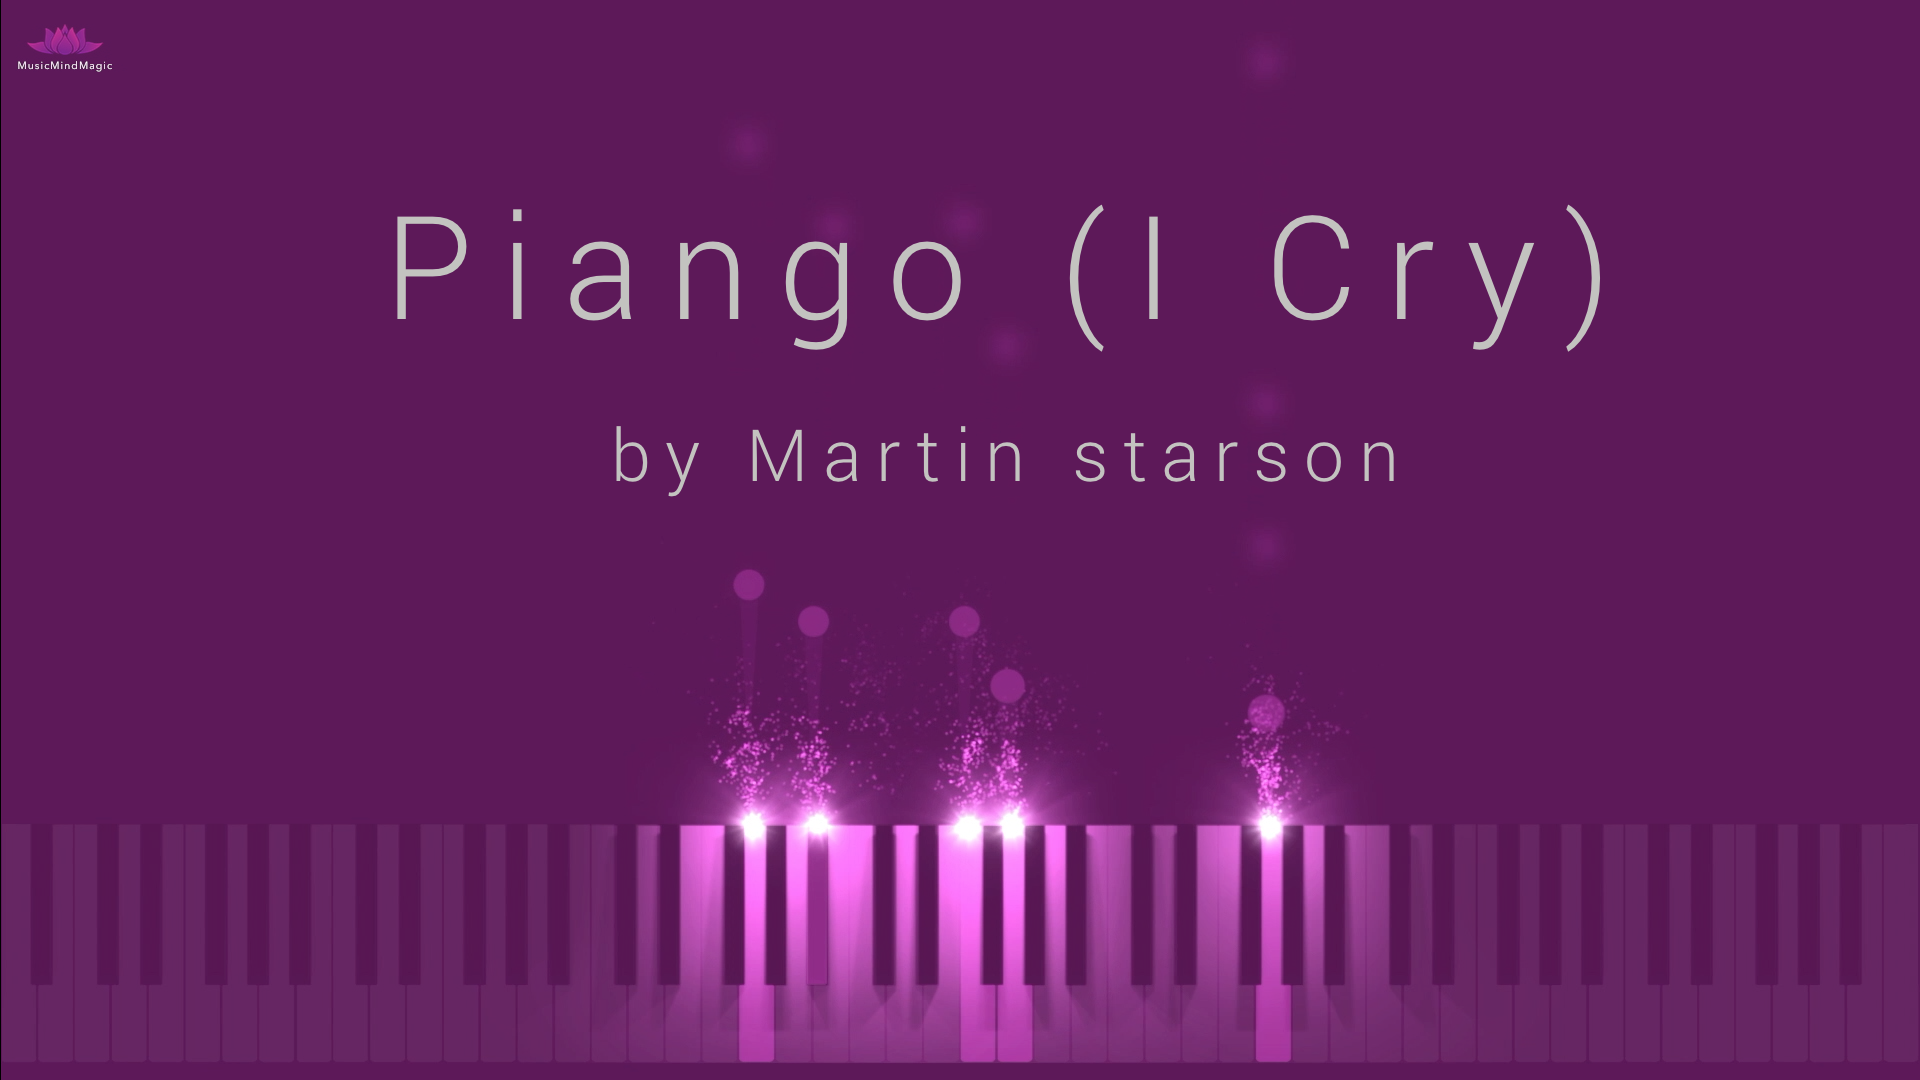 Image showing piano keyboard in violet color